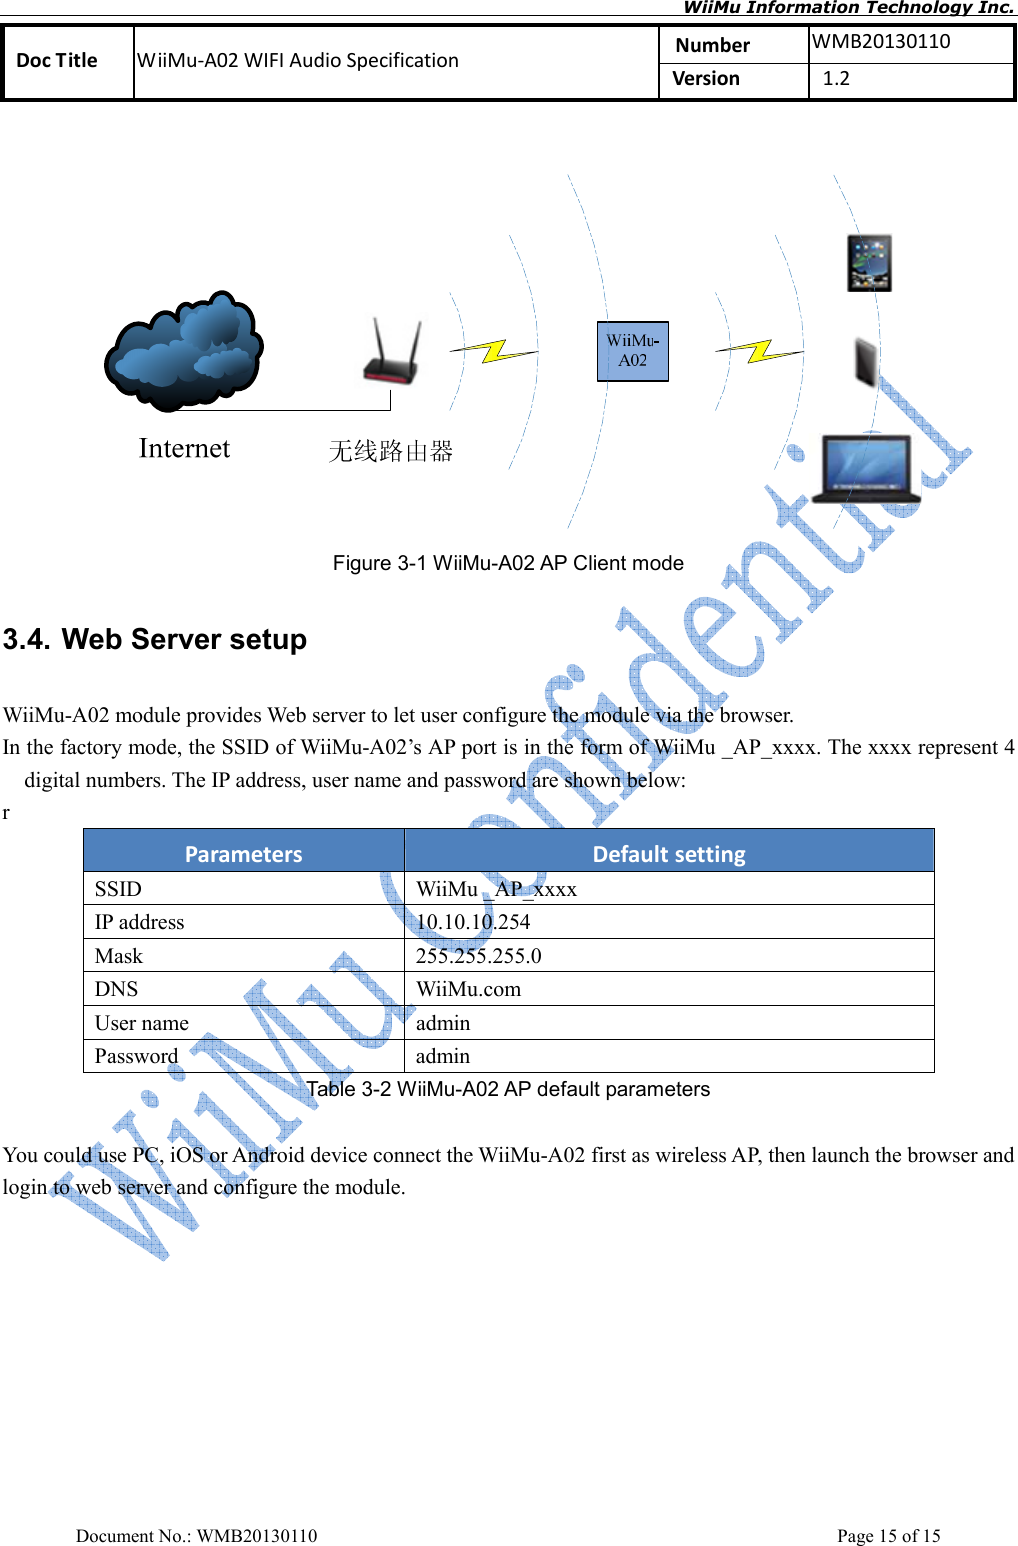       WiiMu Information Technology Inc. Number  WMB20130110 Doc Title  WiiMu-A02 WIFI Audio Specification  Version    1.2  Document No.: WMB20130110    Page 15 of 15   Figure 3-1 WiiMu-A02 AP Client mode 3.4. Web Server setup   WiiMu-A02 module provides Web server to let user configure the module via the browser.   In the factory mode, the SSID of WiiMu-A02’s AP port is in the form of WiiMu _AP_xxxx. The xxxx represent 4 digital numbers. The IP address, user name and password are shown below: r Parameters  Default setting SSID  WiiMu _AP_xxxx IP address  10.10.10.254 Mask  255.255.255.0 DNS    WiiMu.com User name    admin Password  admin Table 3-2 WiiMu-A02 AP default parameters    You could use PC, iOS or Android device connect the WiiMu-A02 first as wireless AP, then launch the browser and login to web server and configure the module.     